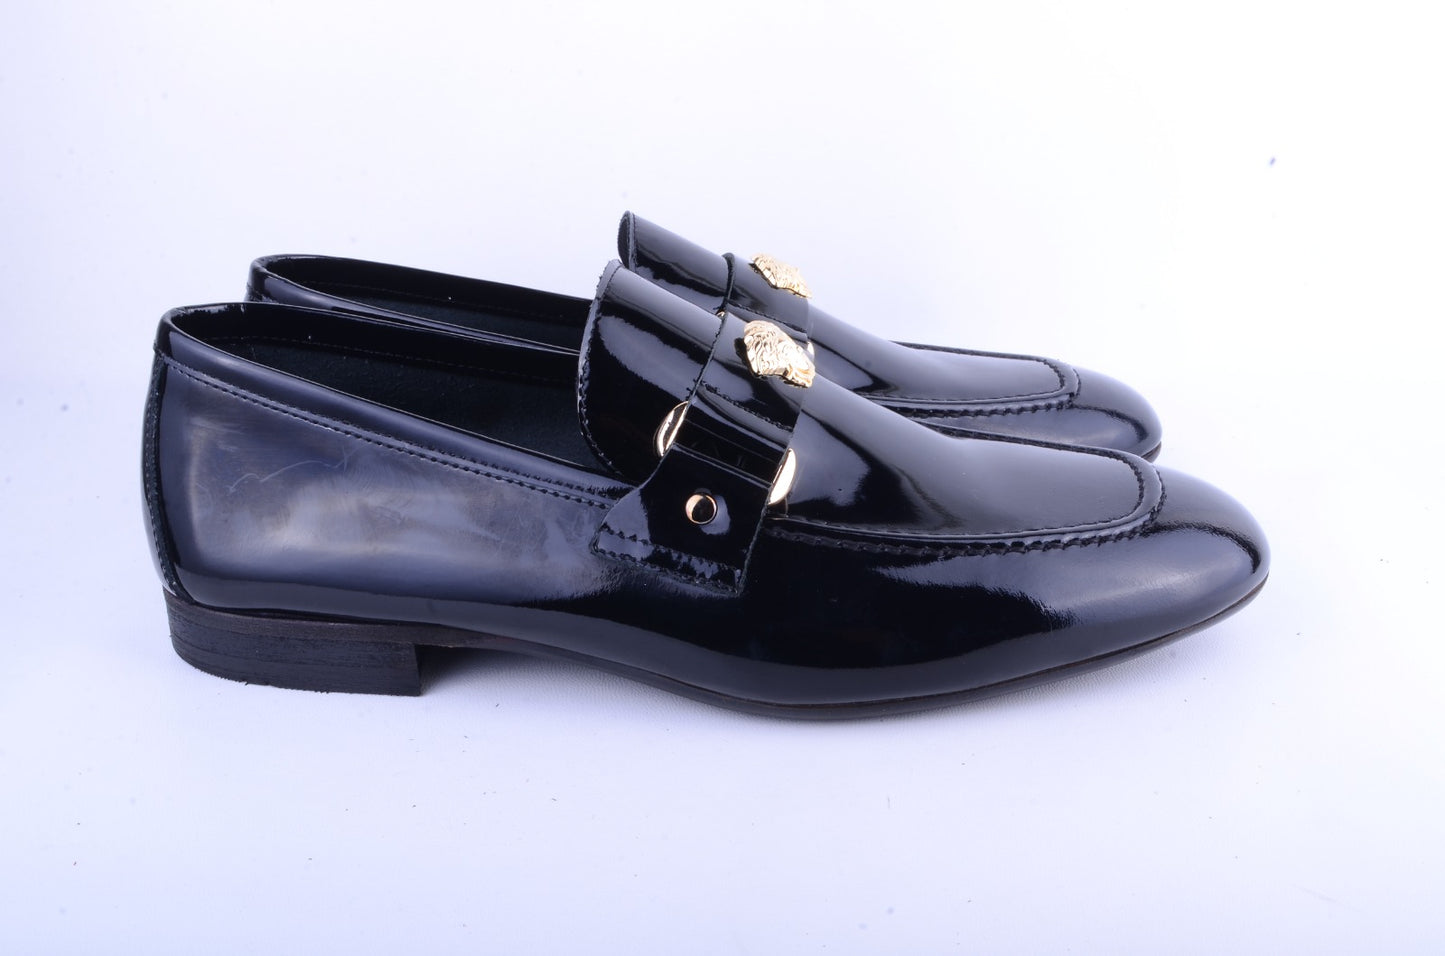 P000662-5229 Black Patent Loafer with Medusa ornament